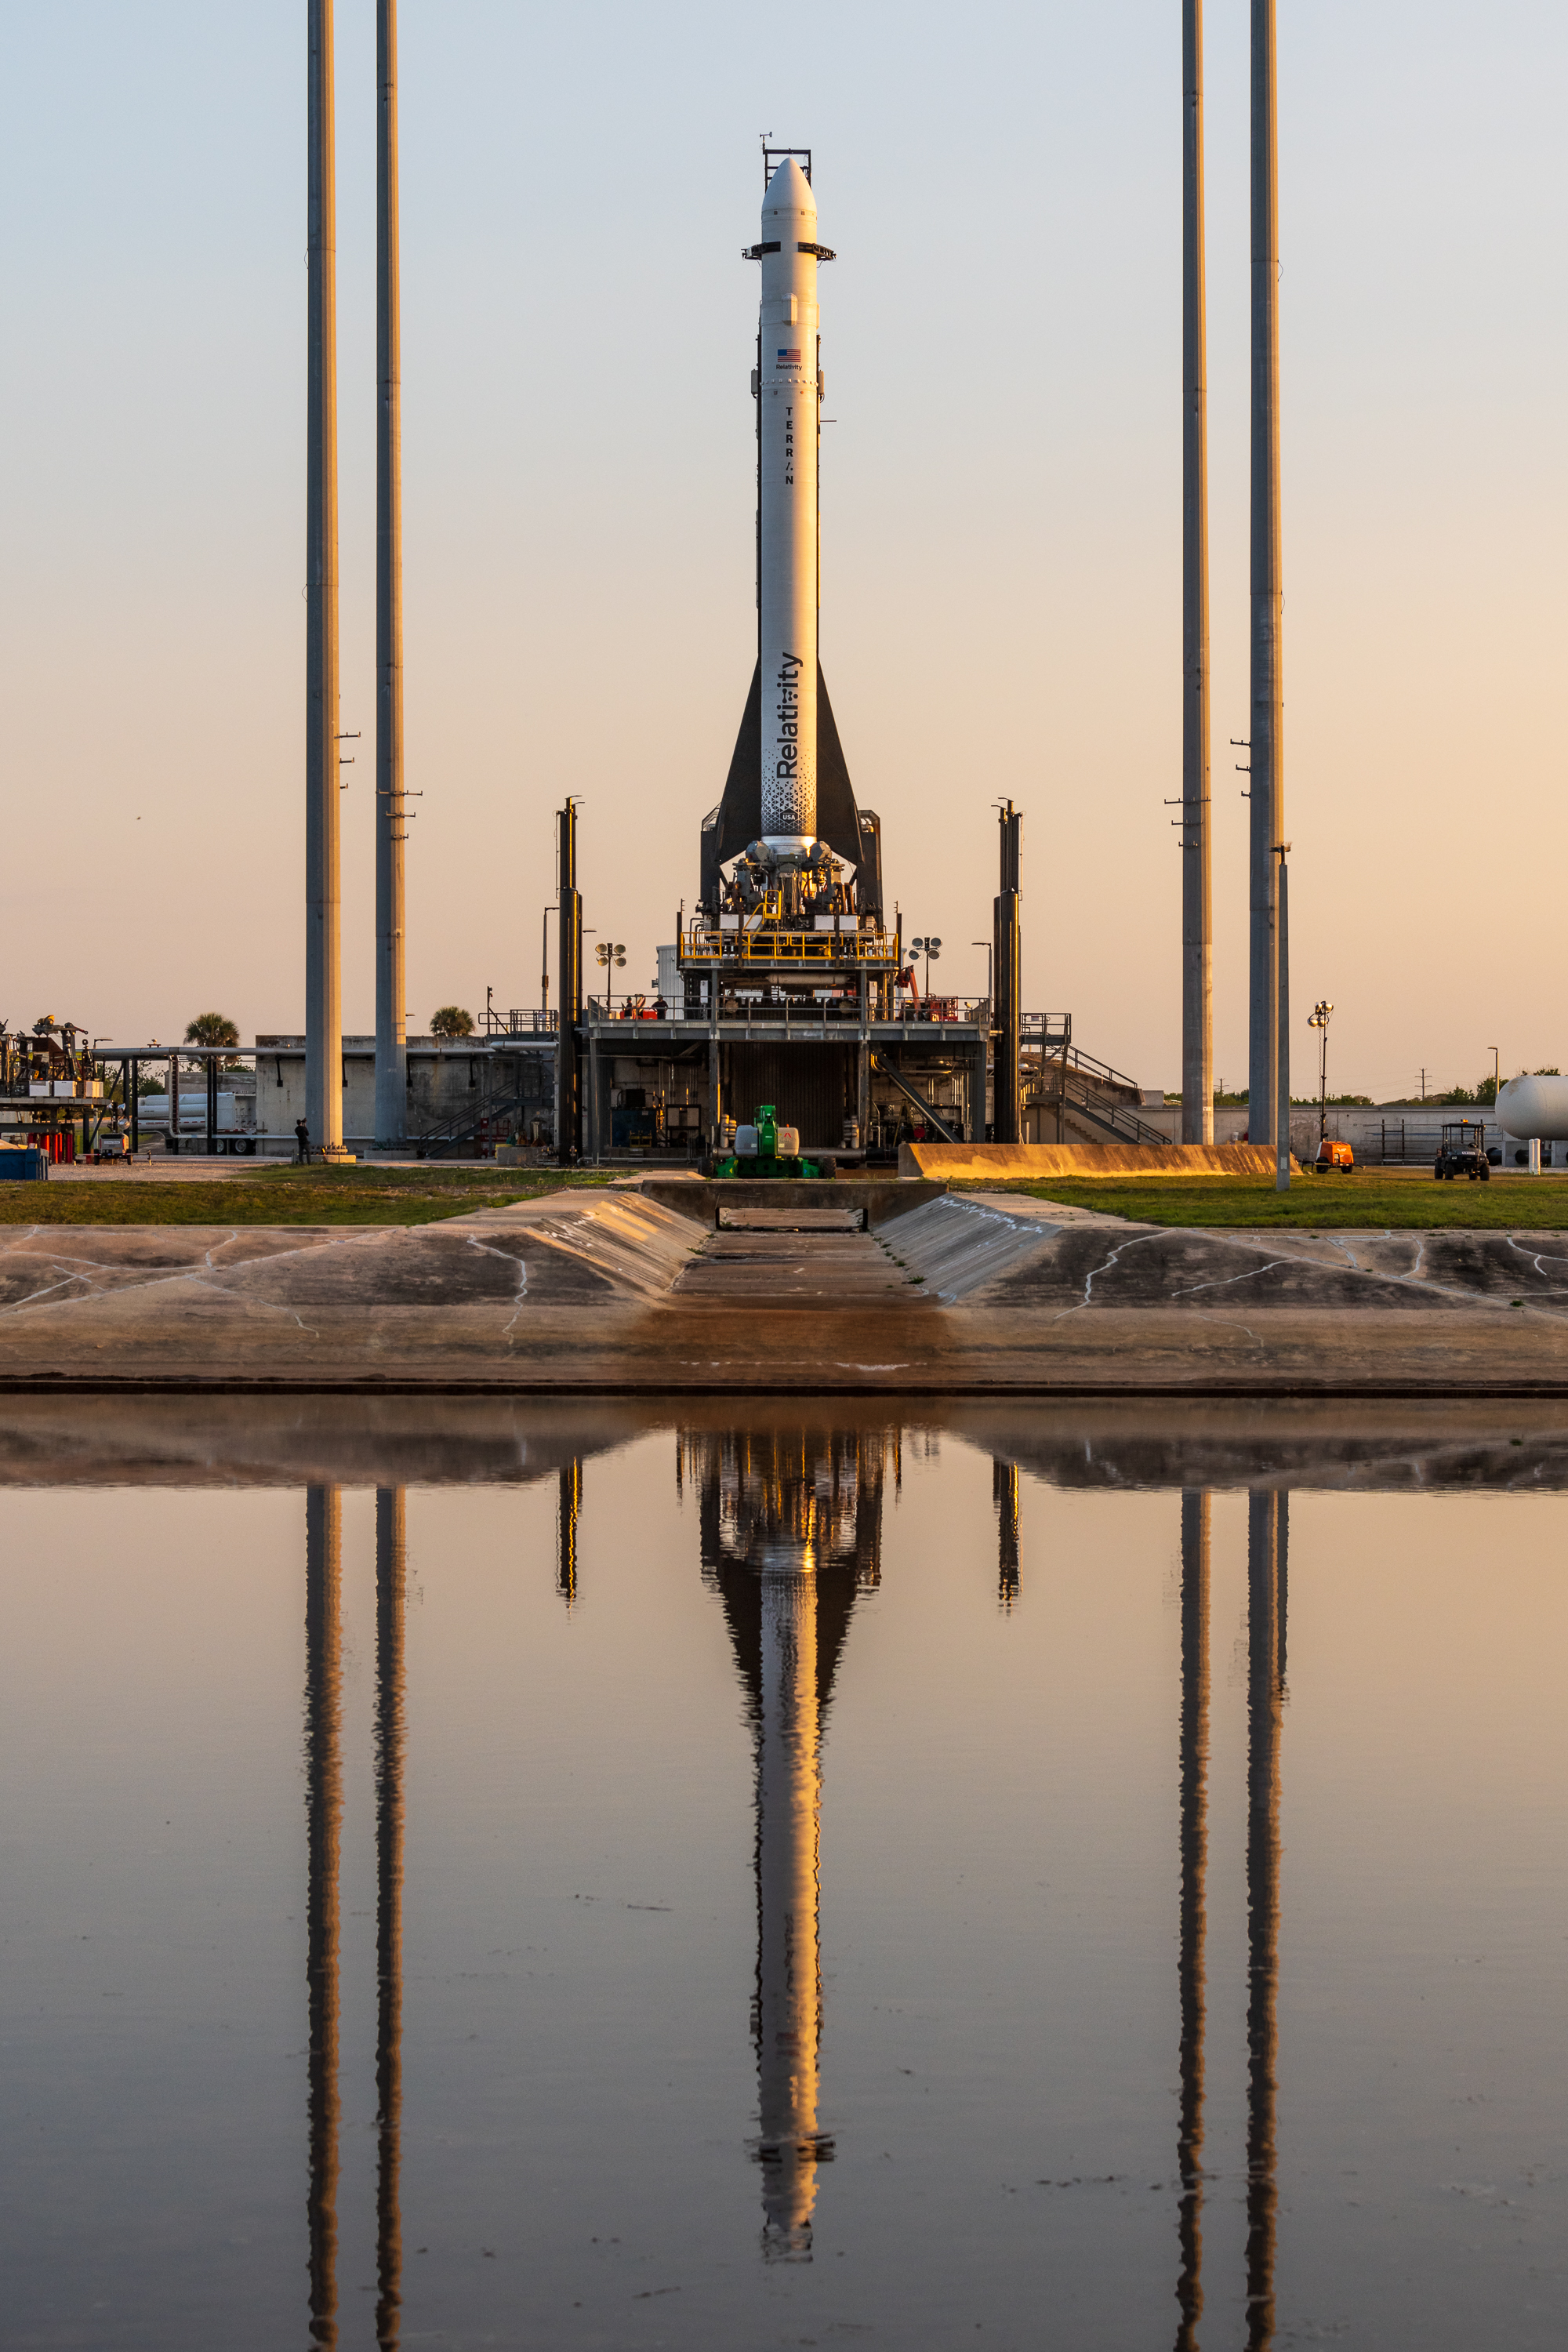 Relativity Space's 3D-printed Terran 1 rocket stands ready on the launch pad before its first liftoff.